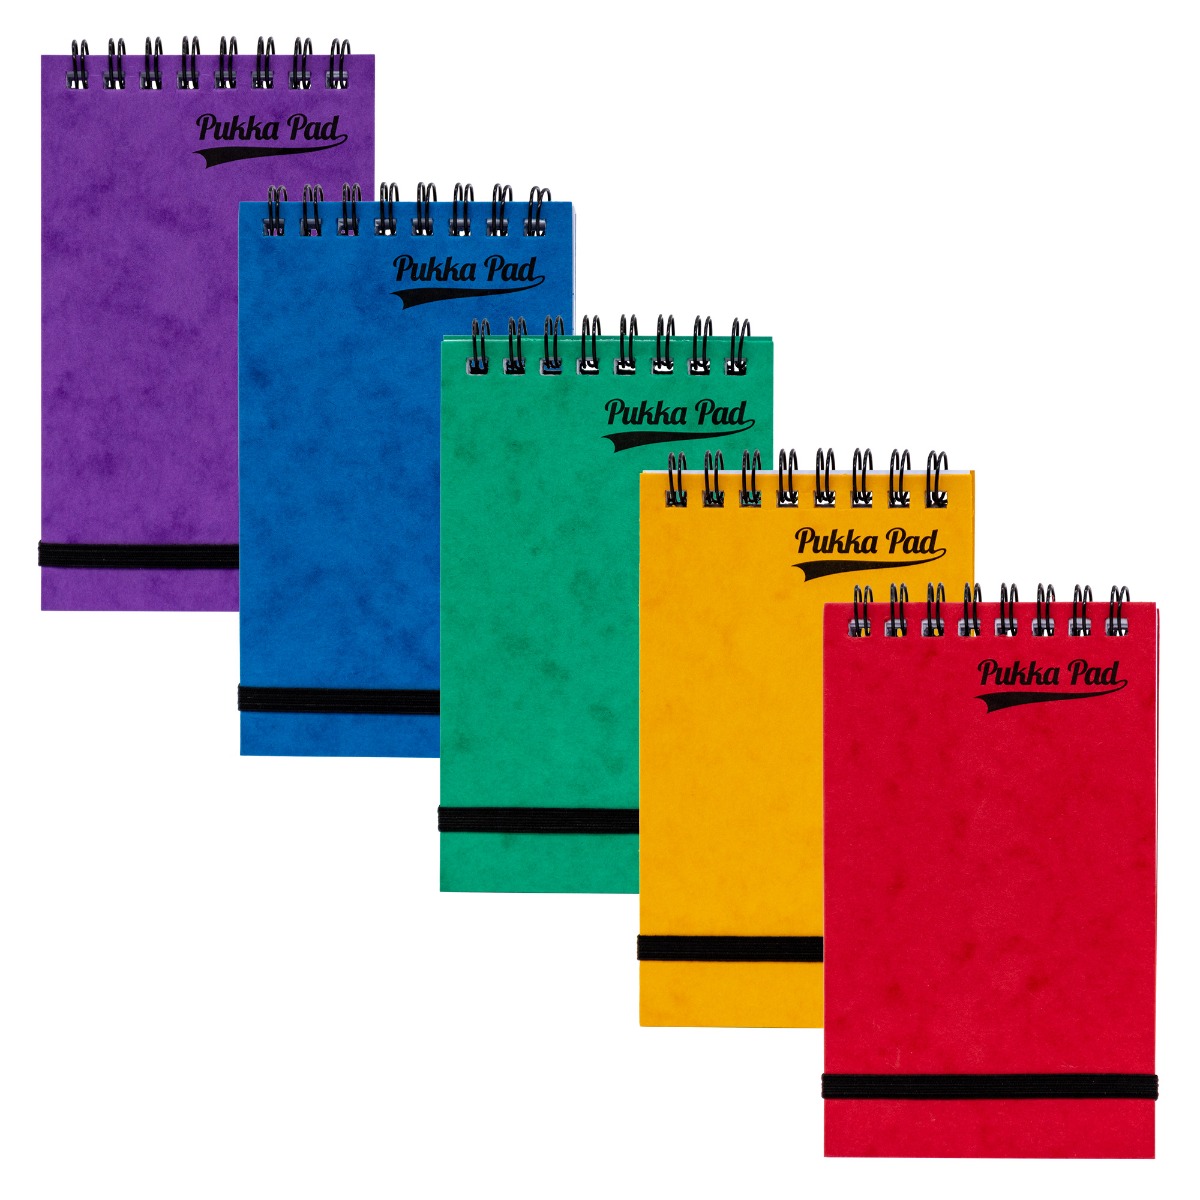 Clairefontaine Top-Bound Reporter's Style Notebooks (Lined or Grid